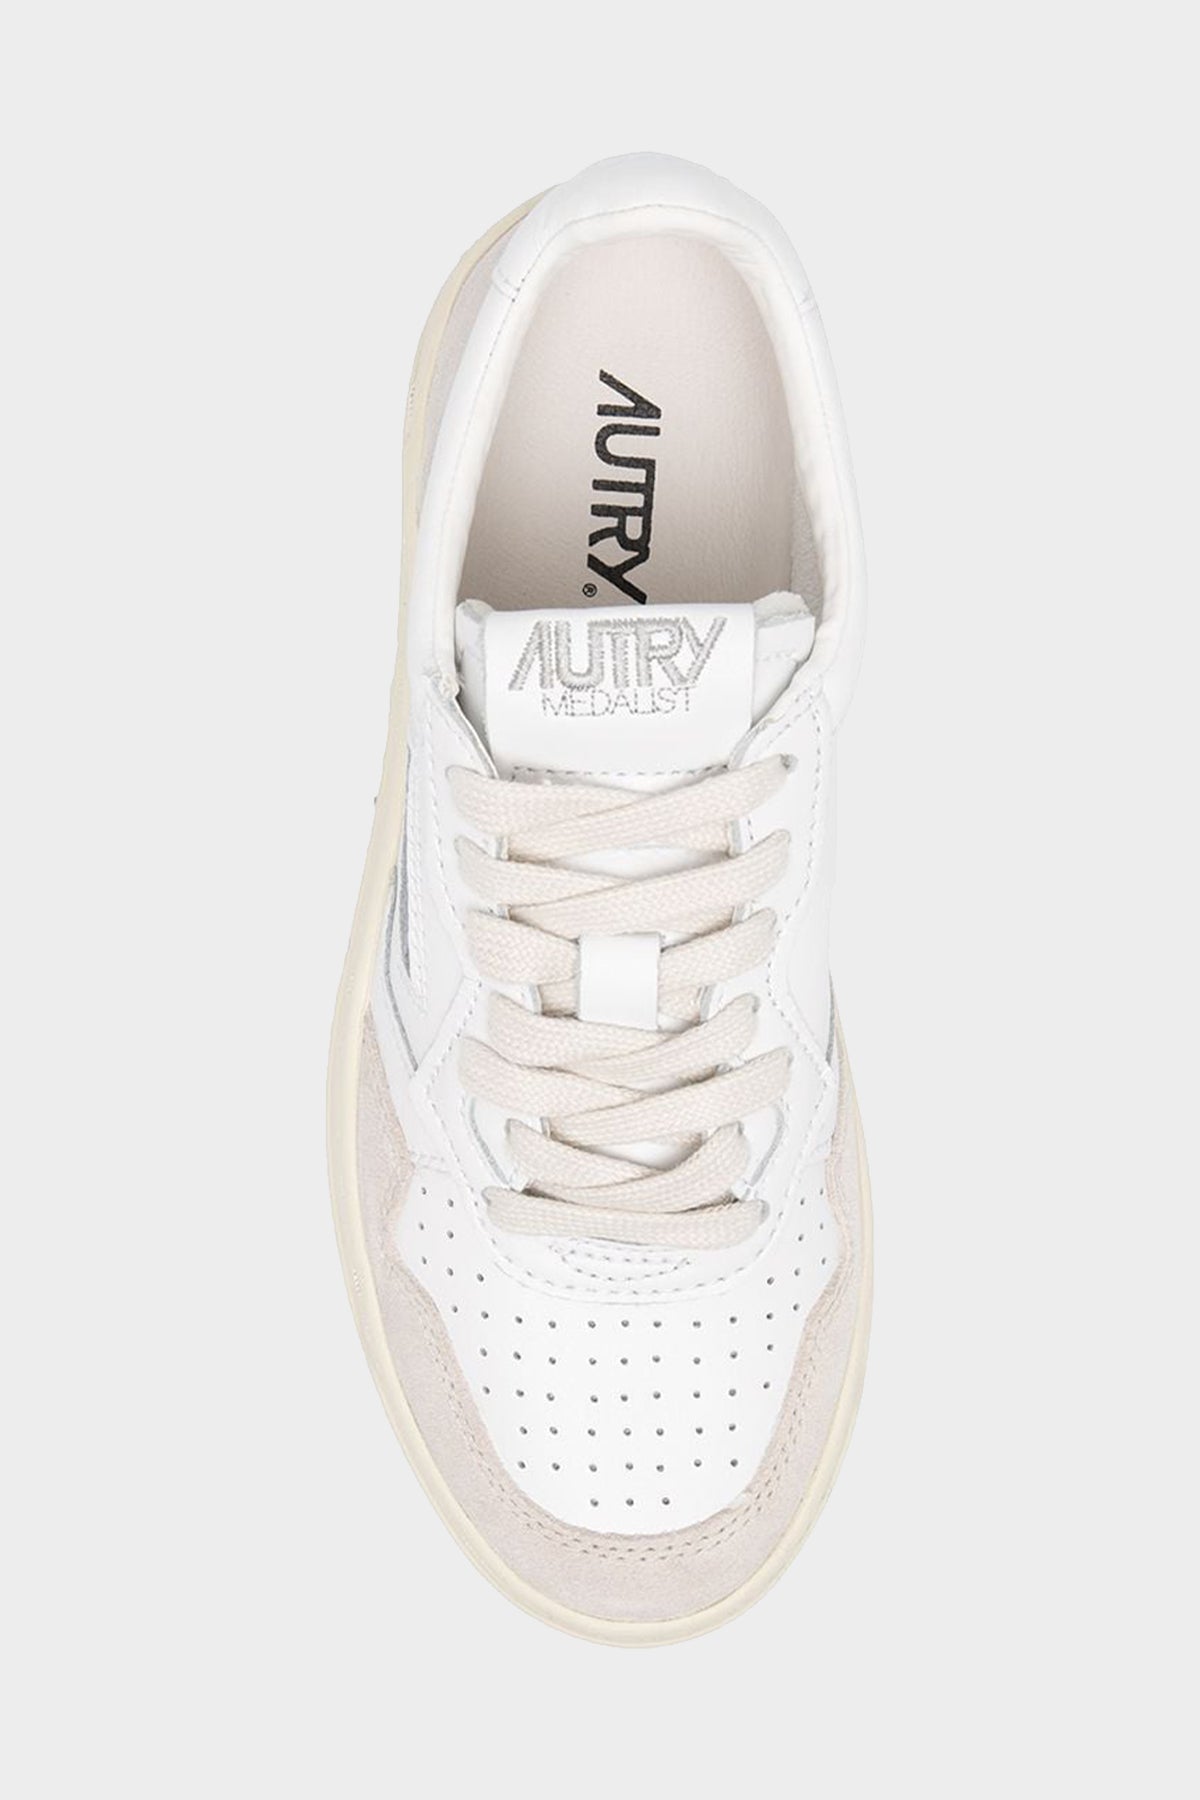 Medalist Low Suede Leather Sneaker in White - shop-olivia.com